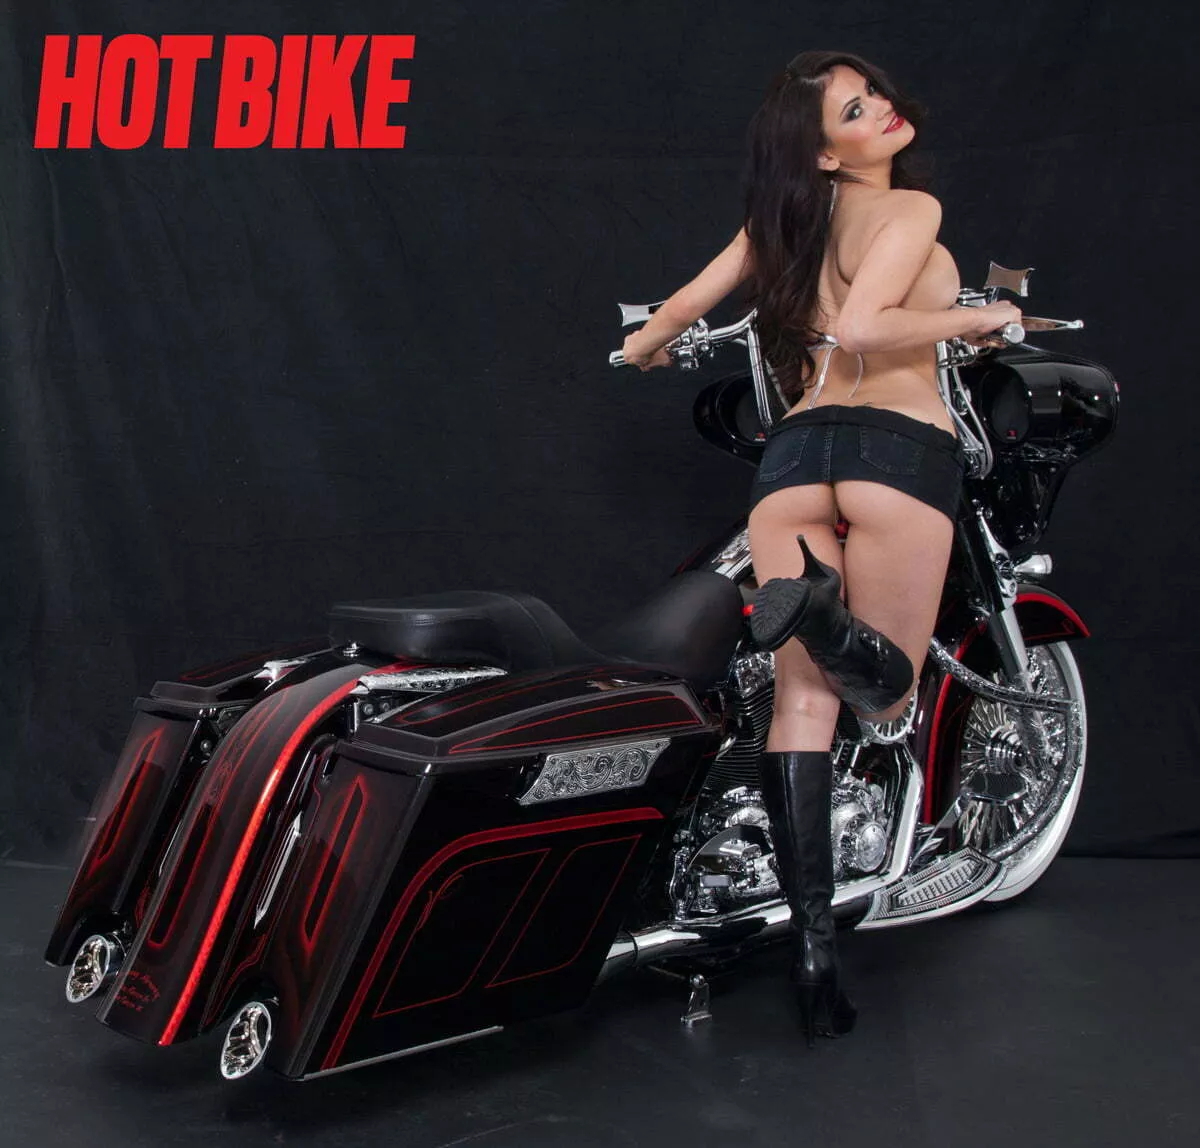 Nude Girl Models On Motorcycles